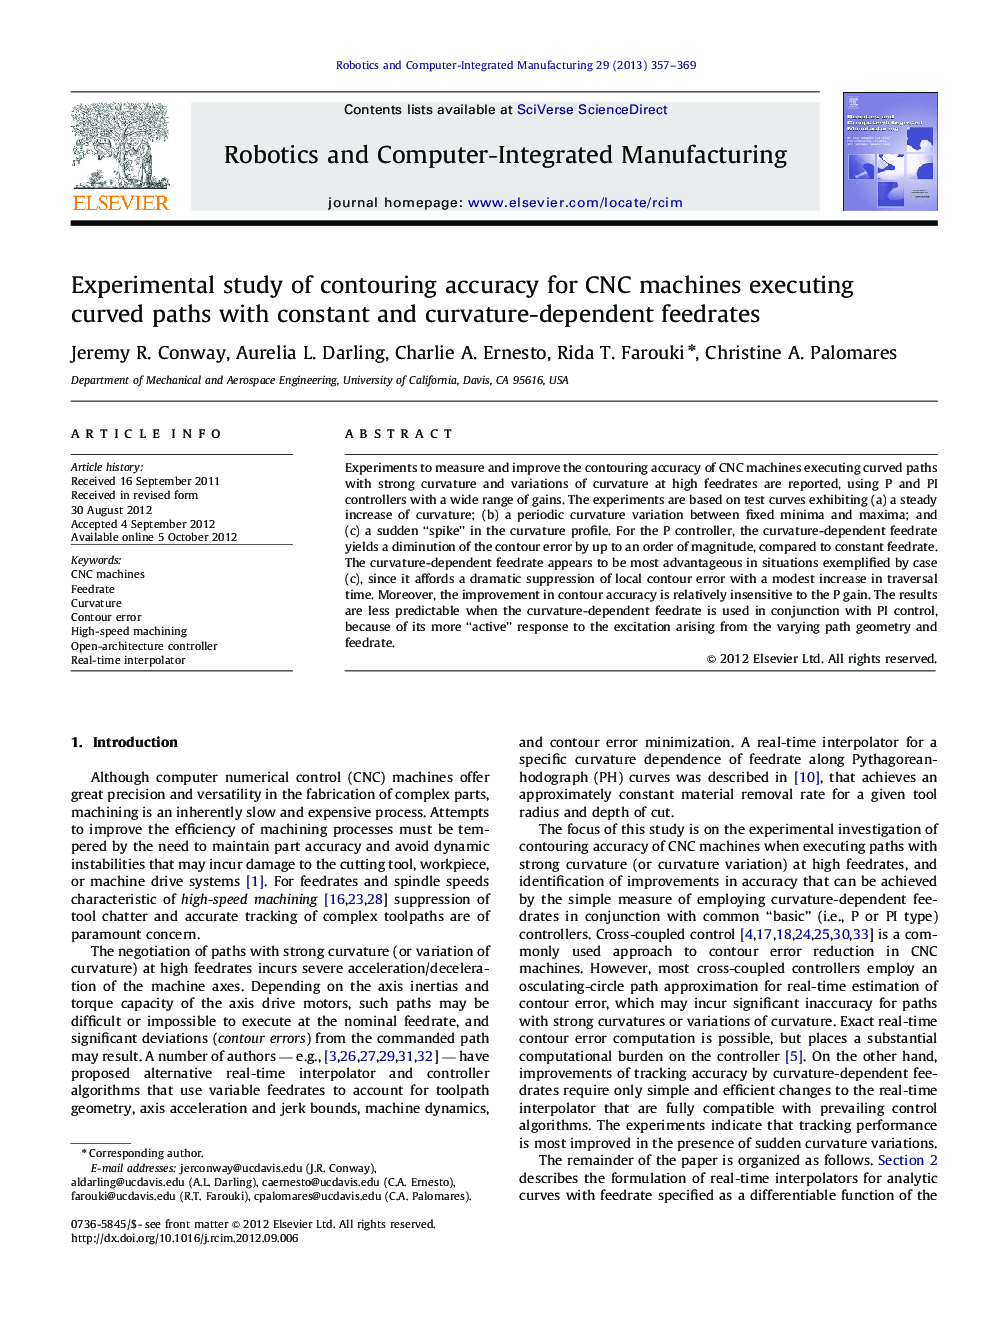 Experimental study of contouring accuracy for CNC machines executing curved paths with constant and curvature-dependent feedrates